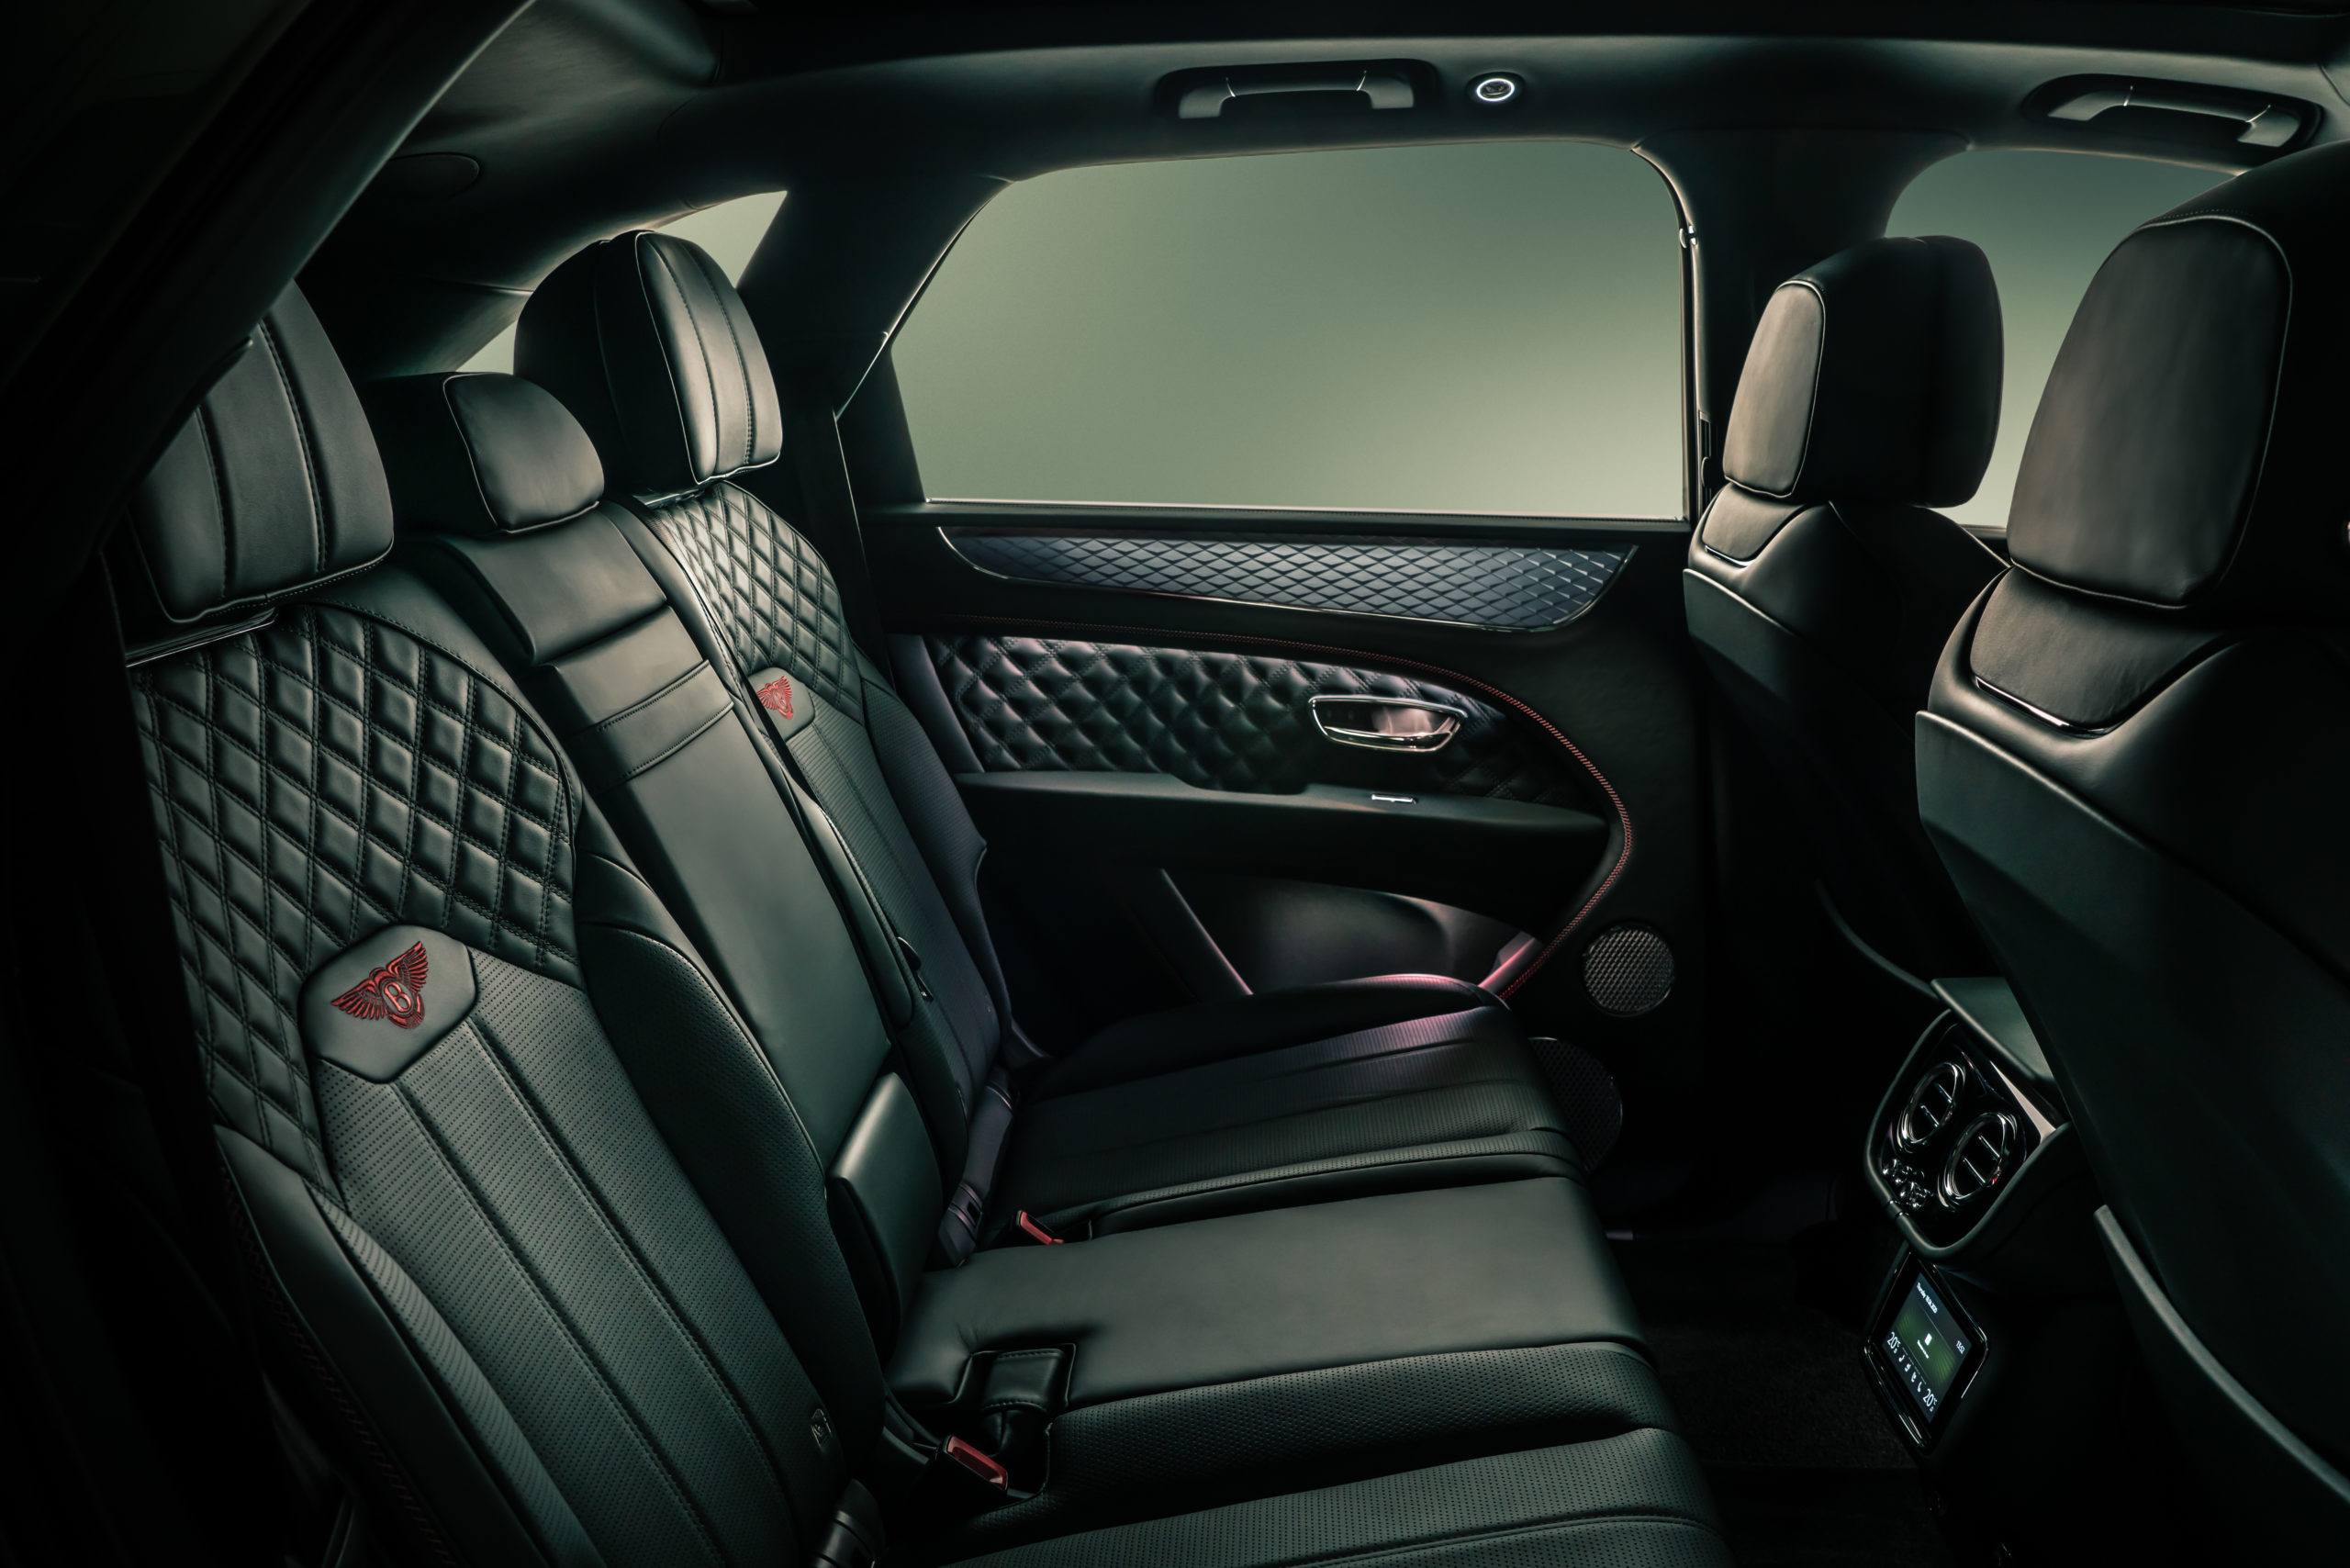 Bentley’s Green Interior Looks Like A Sexy Reptile Villain’s Lair And I Love It